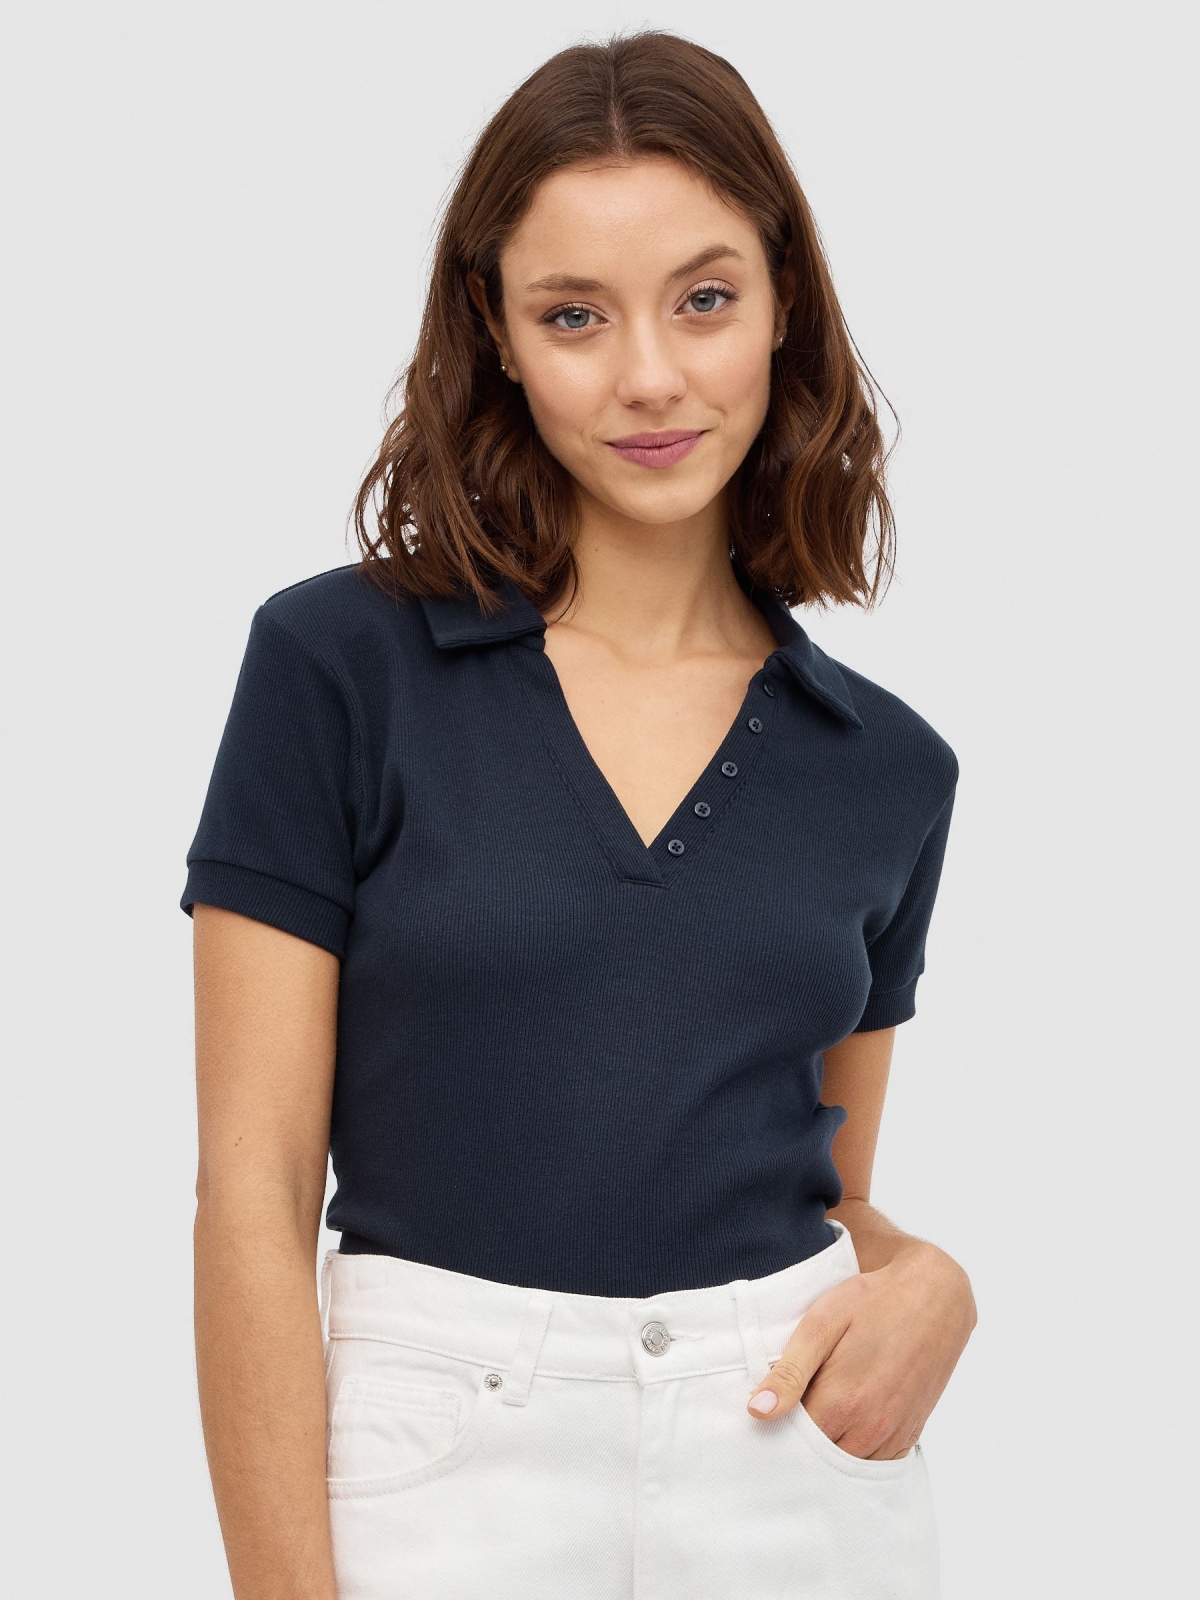 Polo neck t-shirt navy middle front view